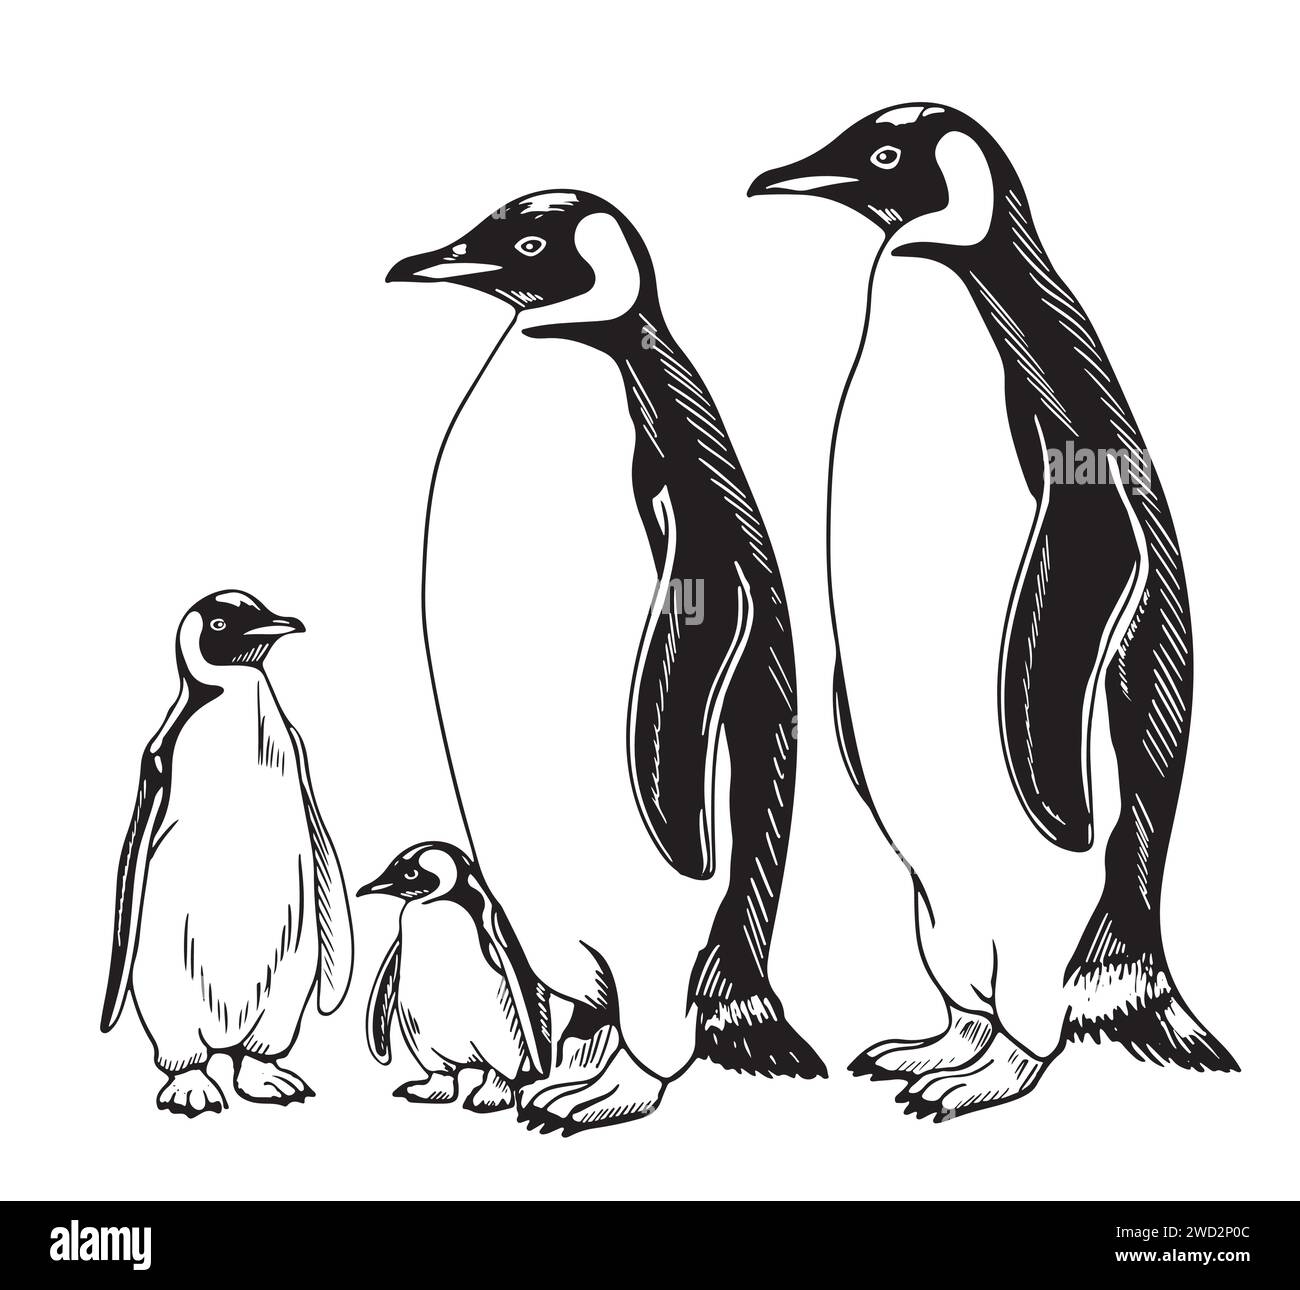 Penguin. Outline drawing. Graphics for web design. Black and white logo. Close-up. Marine theme. It can be used for fridge magnets, magazines, stamps, stickers, liners. Stock Vector